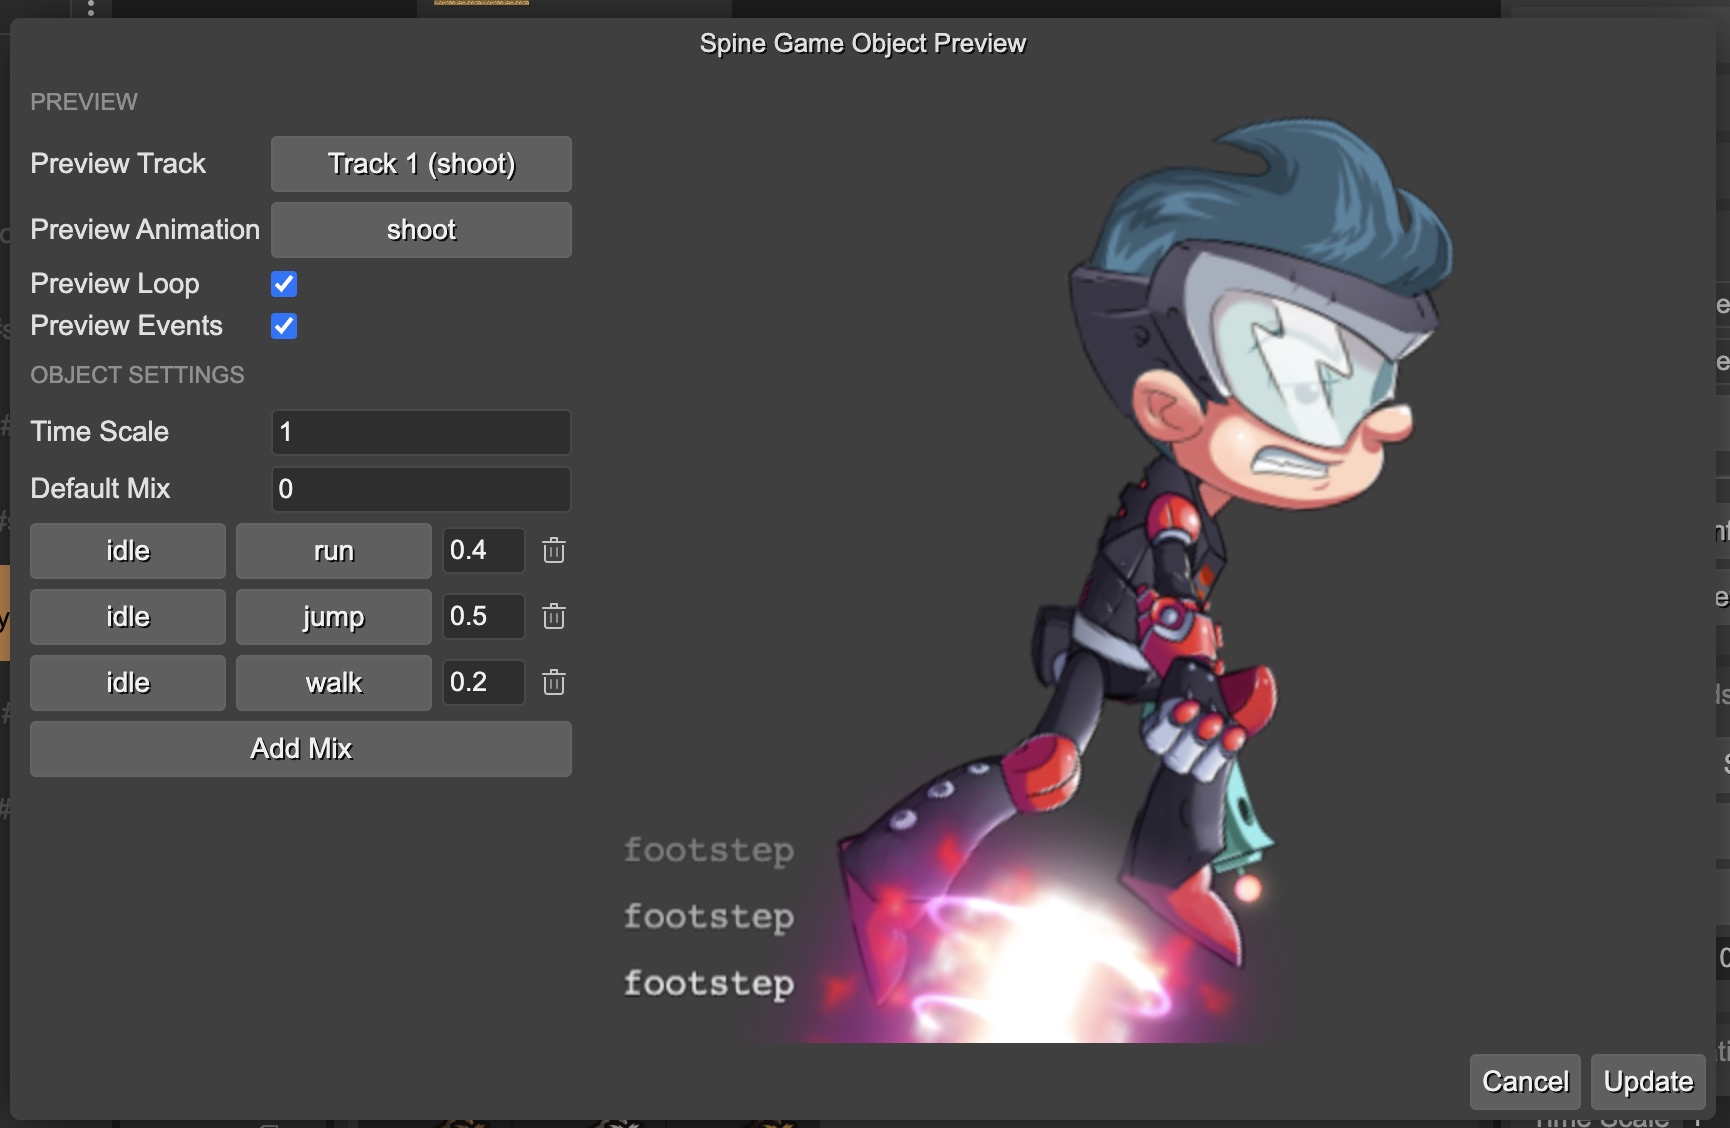 Spine game object preview